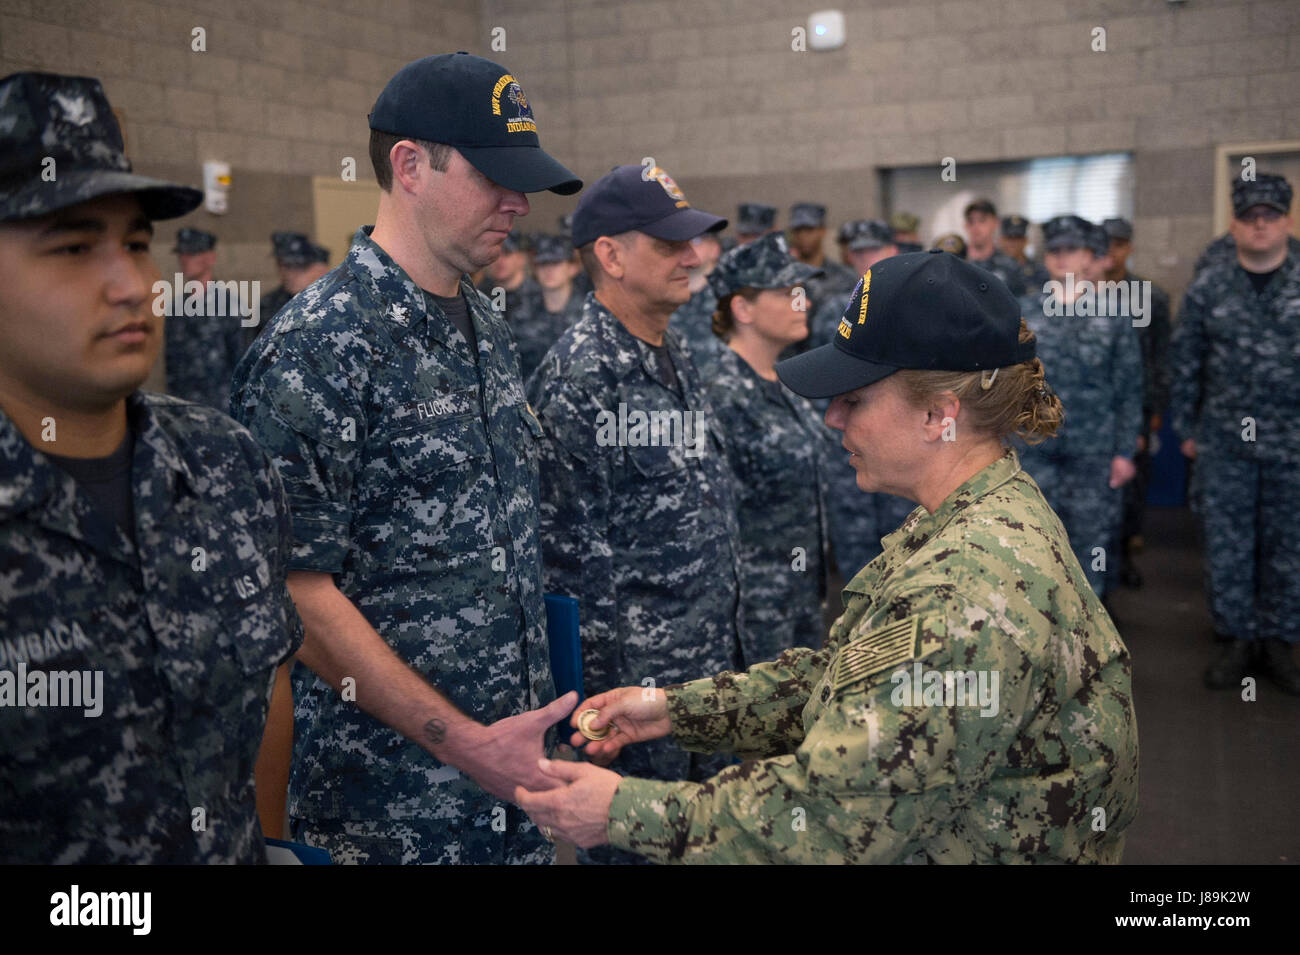 170520-N-QP351-061 INDIANAPOLIS (May 20, 2017) Rear Admiral Linda Wackerman, Deputy Commander, U.S. Naval Forces Southern Command, 4th Fleet, visits with Sailors from Navy Operational Support Center Indianapolis during an Admirals Call. Wackerman who also serves as the flag mentor for NOSC Indianapolis, held an all-hands Q&A session for E-6 and below Sailors to address upcoming changes and get feedback regarding Navy-related issues they feel need to be improved. (U.S. Navy photo by Mass Communication Specialist 2nd Class (SW/EXW/AW/SC) J. Michael Schwartz) Stock Photo